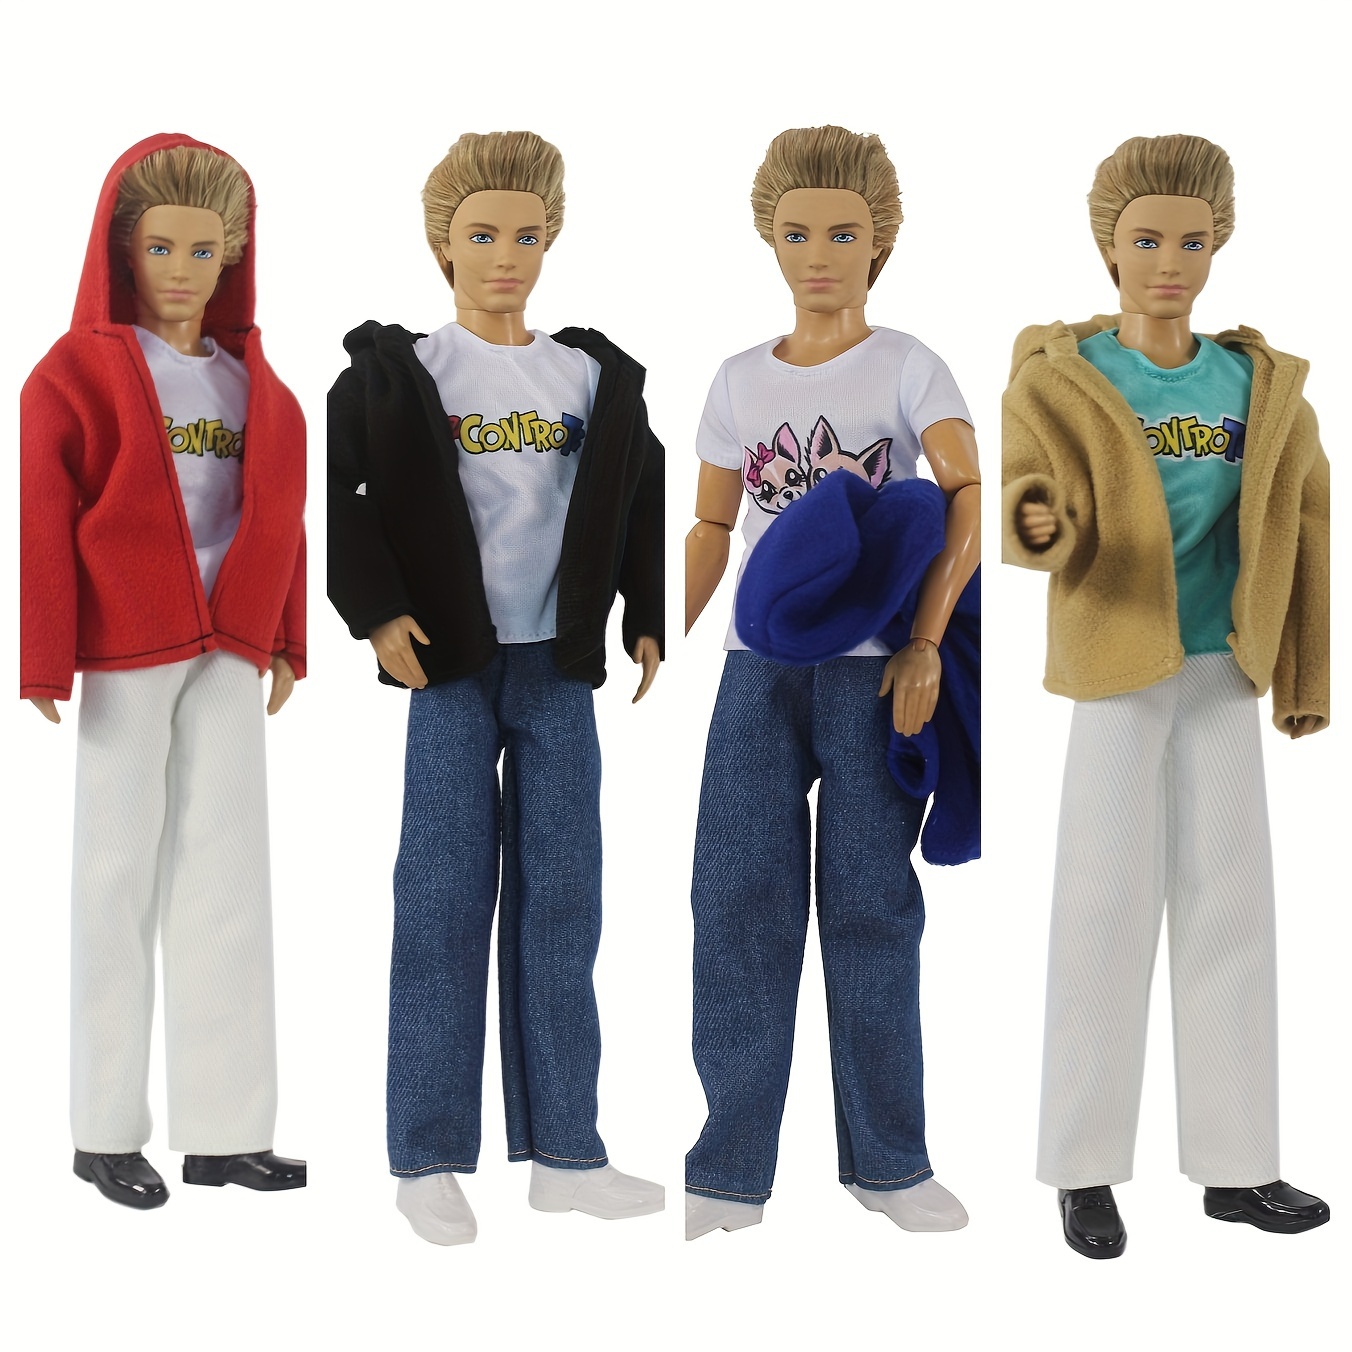 Camouflage Ken Doll Clothes Jacket T-Shirt Trouser 11.5'' Male Doll Outfits  Toys